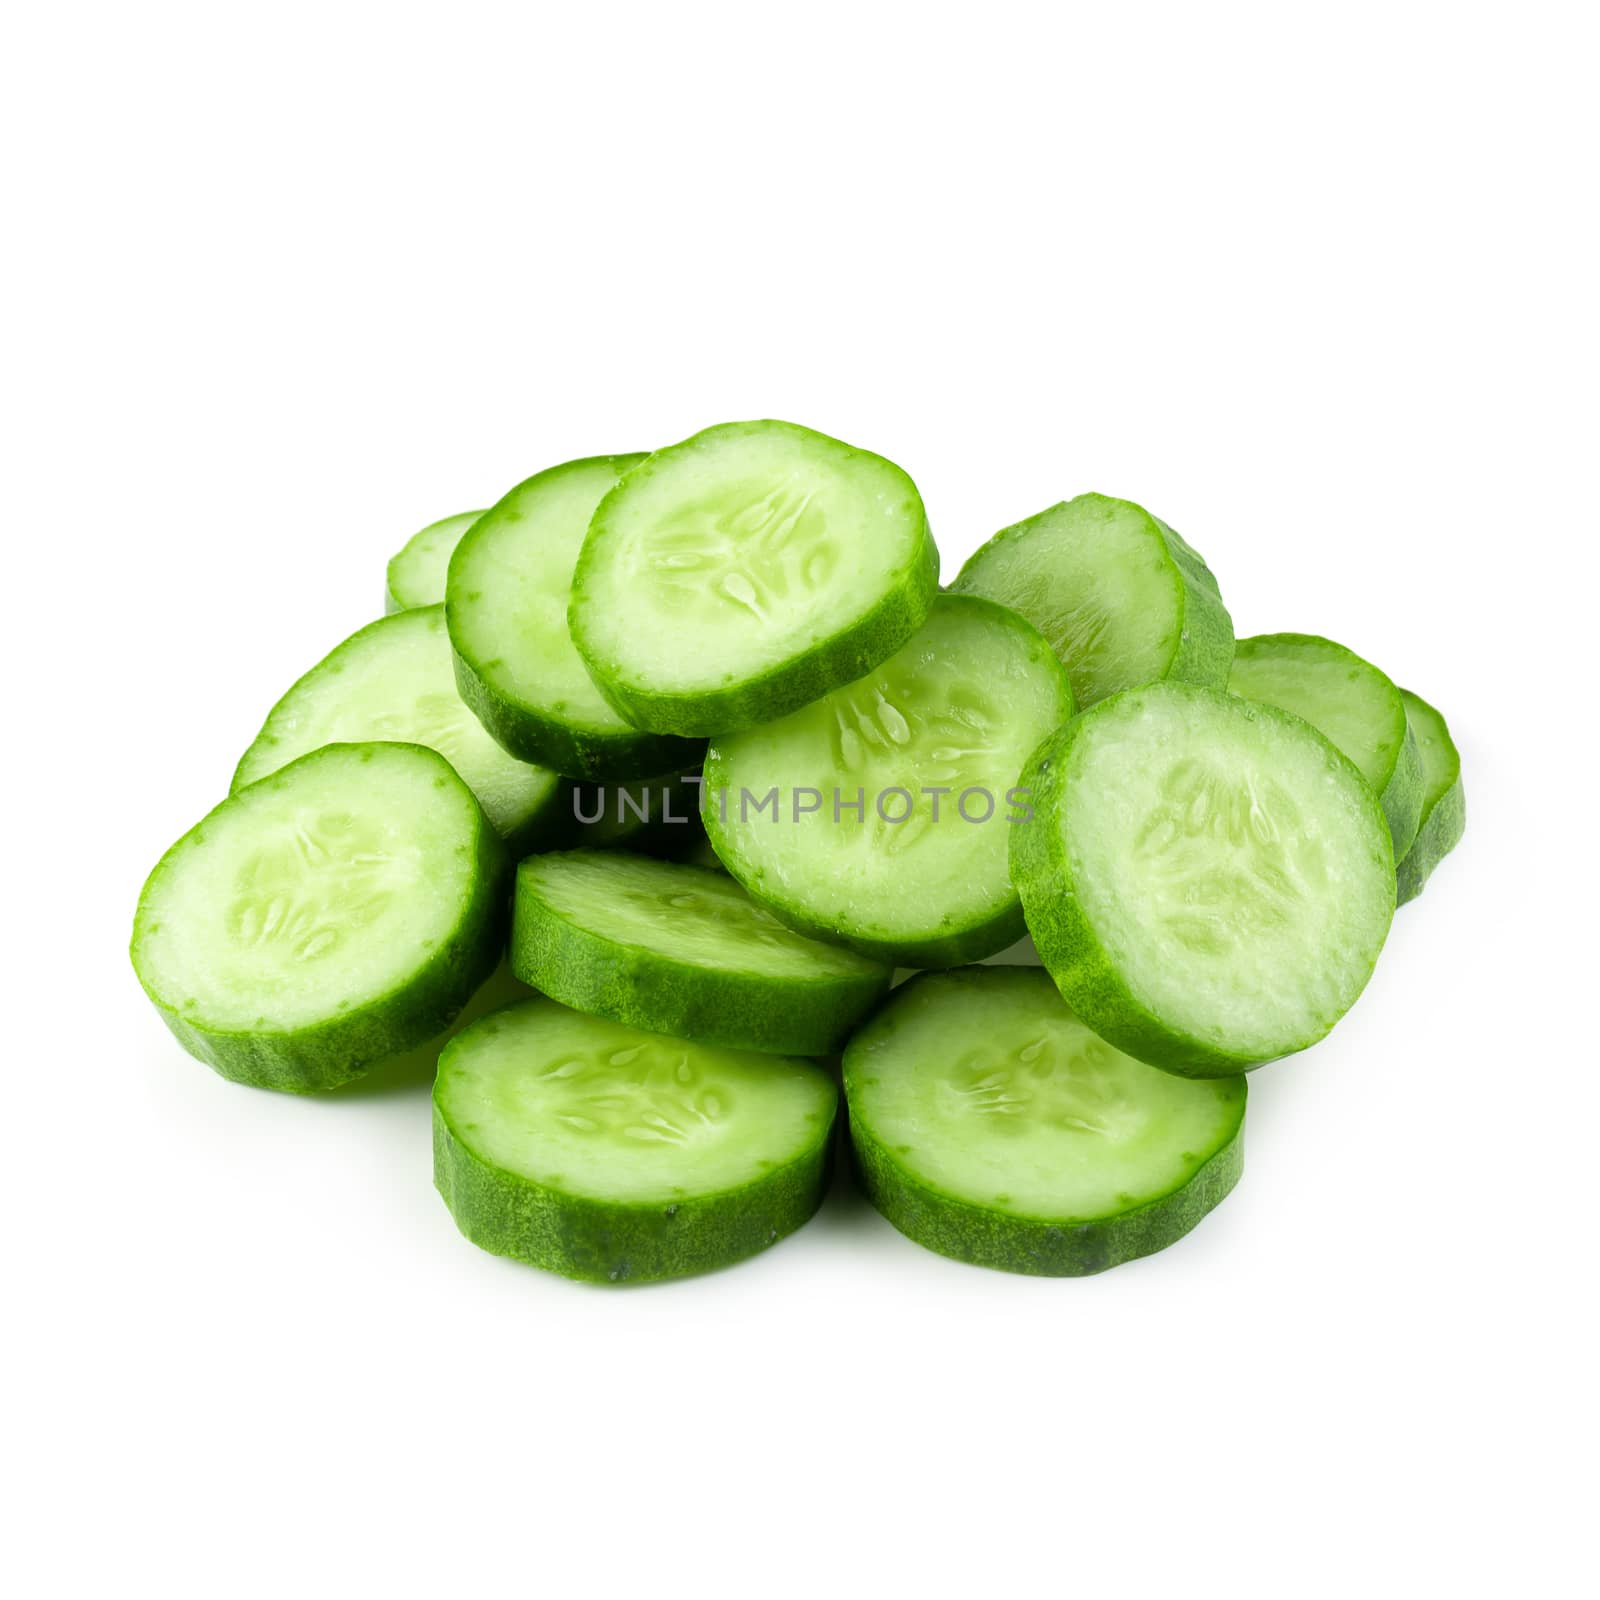 cucumber slice isolated over a white background by kaiskynet